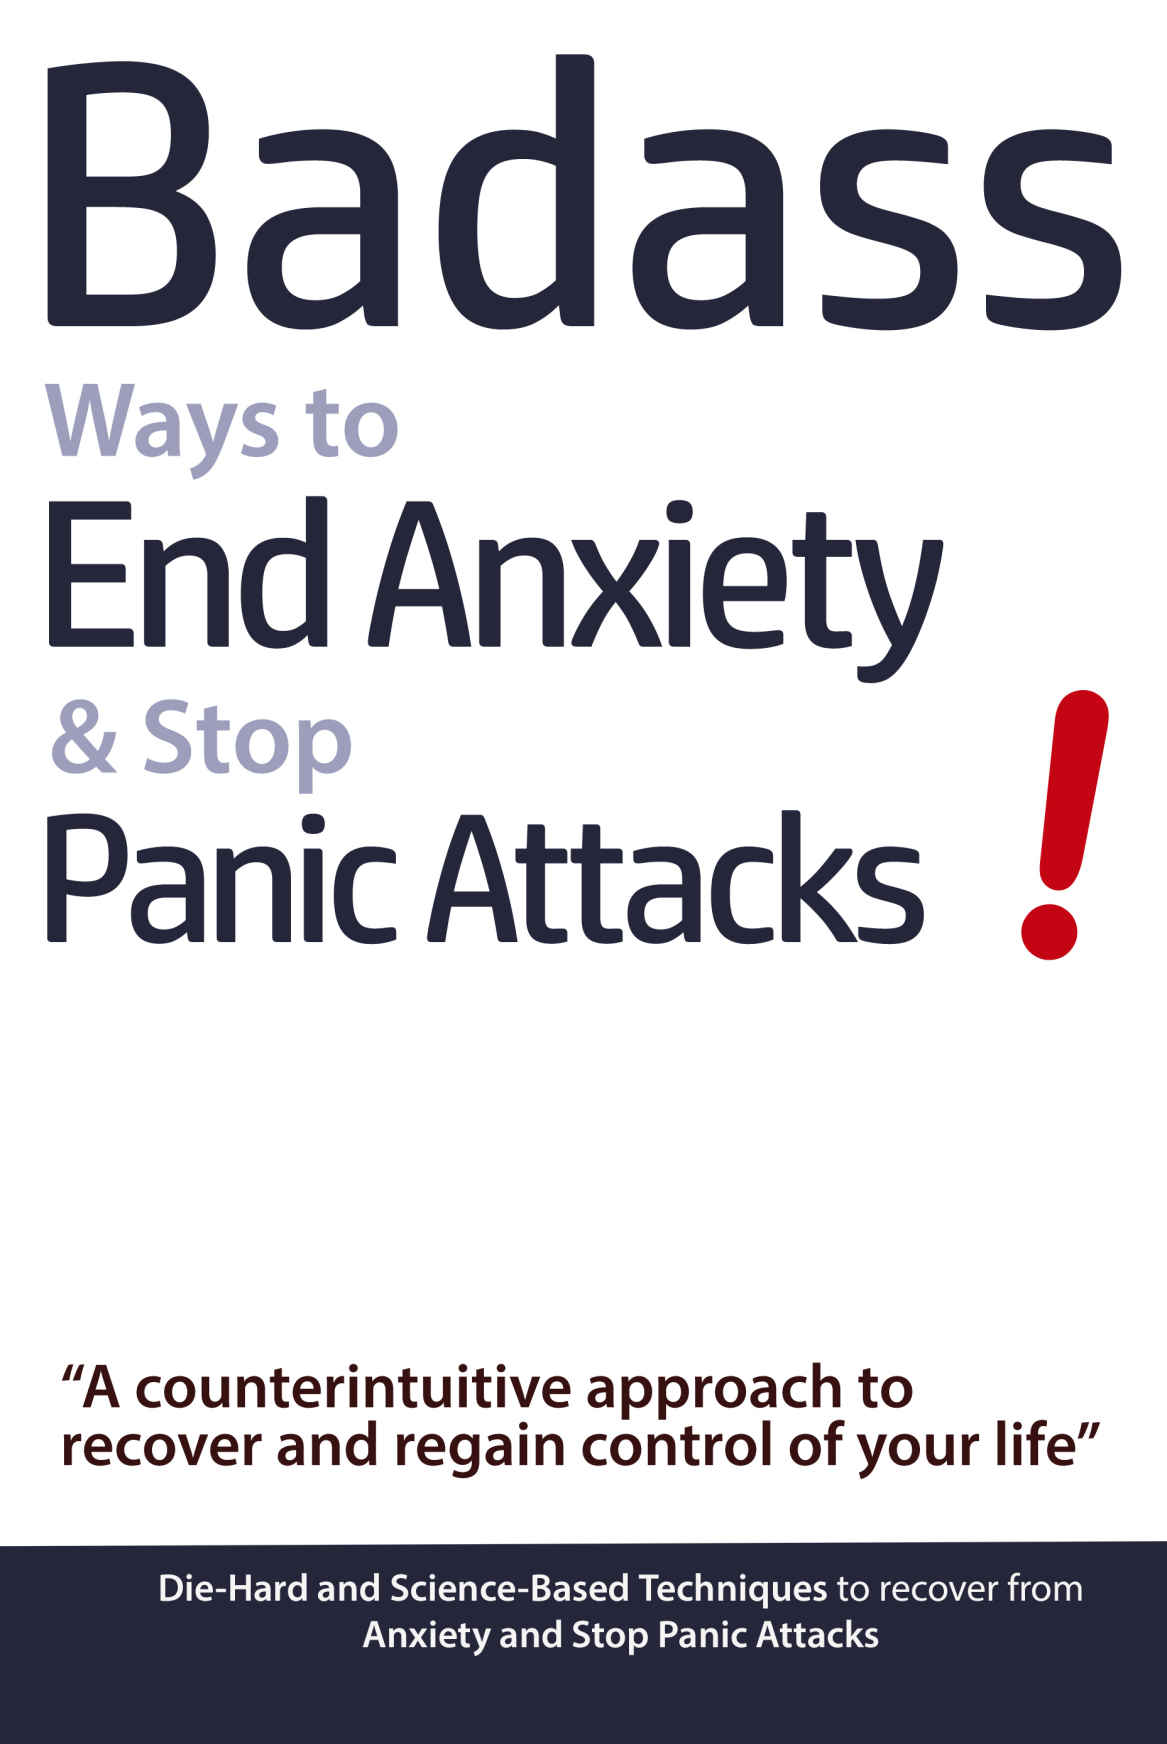 Badass Ways to End Anxiety & Stop Panic Attacks!